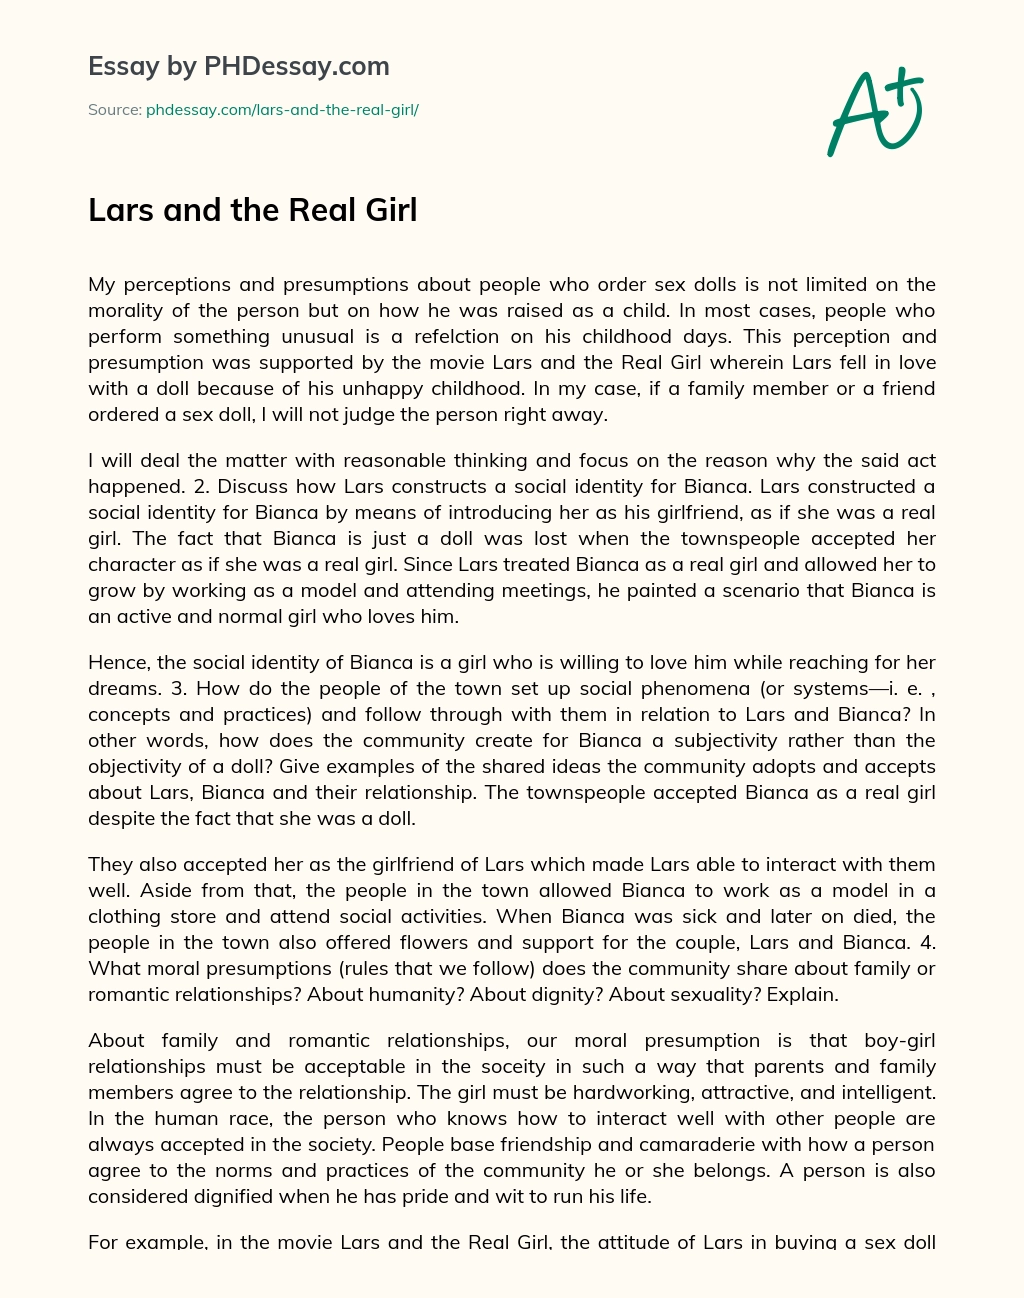 Lars and the Real Girl essay